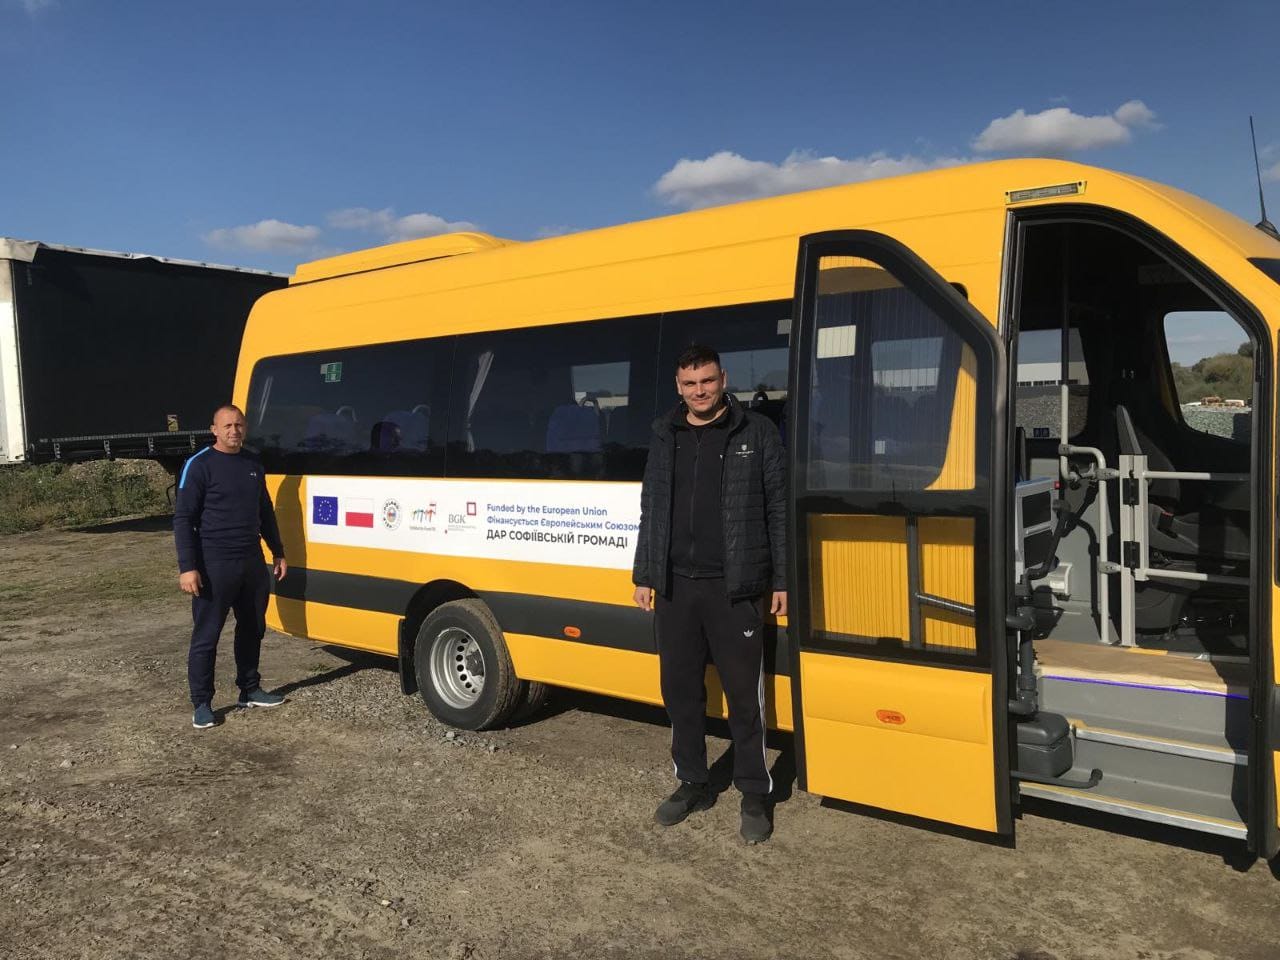 As part of cooperation with Polish partners, a new school bus was received